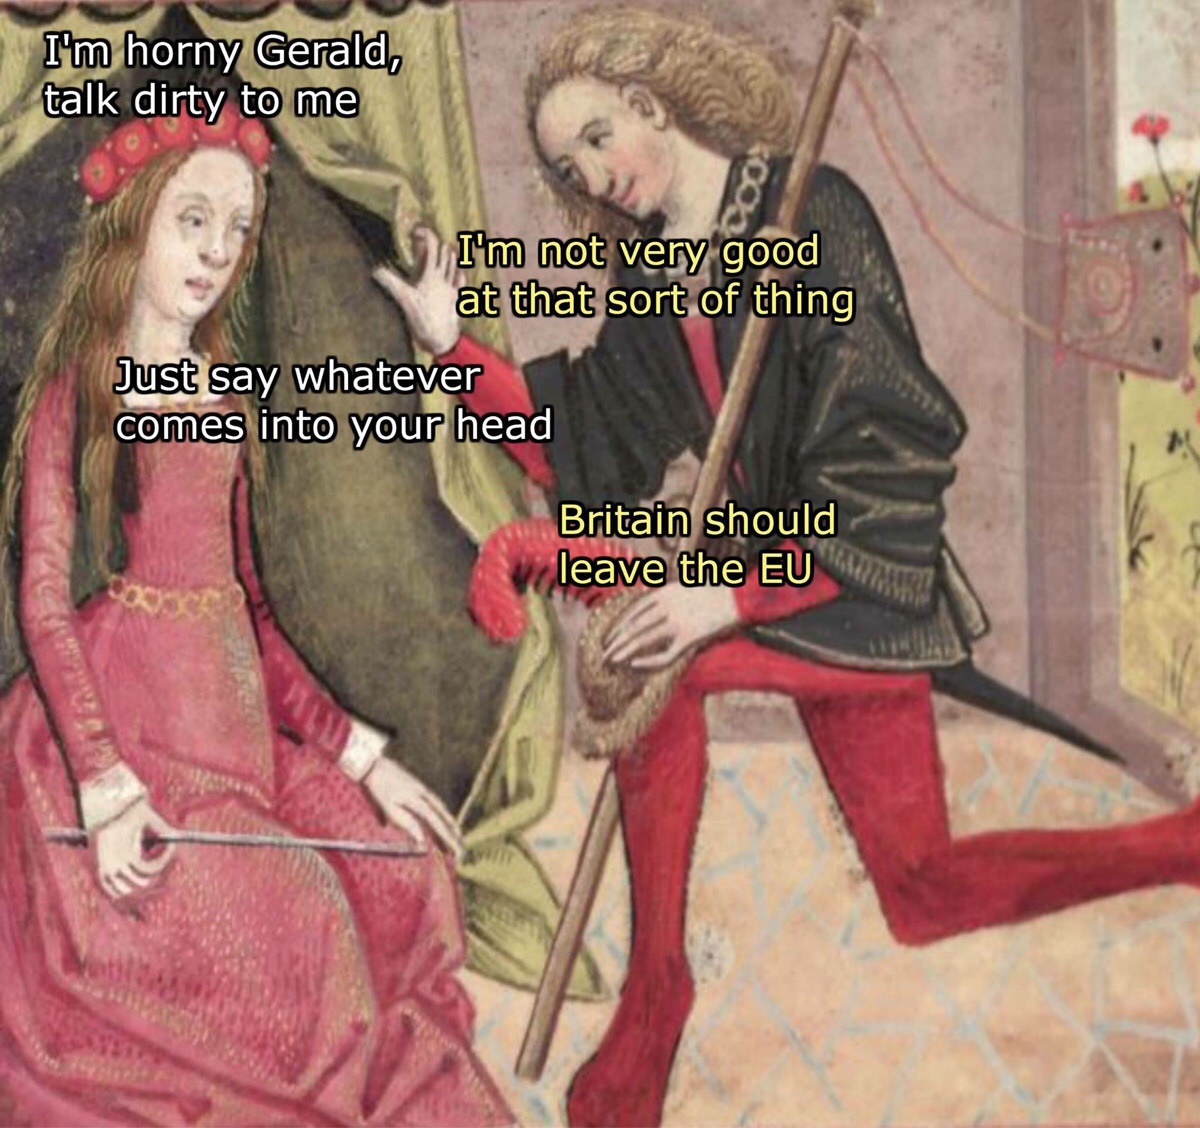 meme - dirty classical art memes - I'm horny Gerald, talk dirty to me I'm not very good at that sort of thing Just say whatever comes into your head Britain should leave the Eu